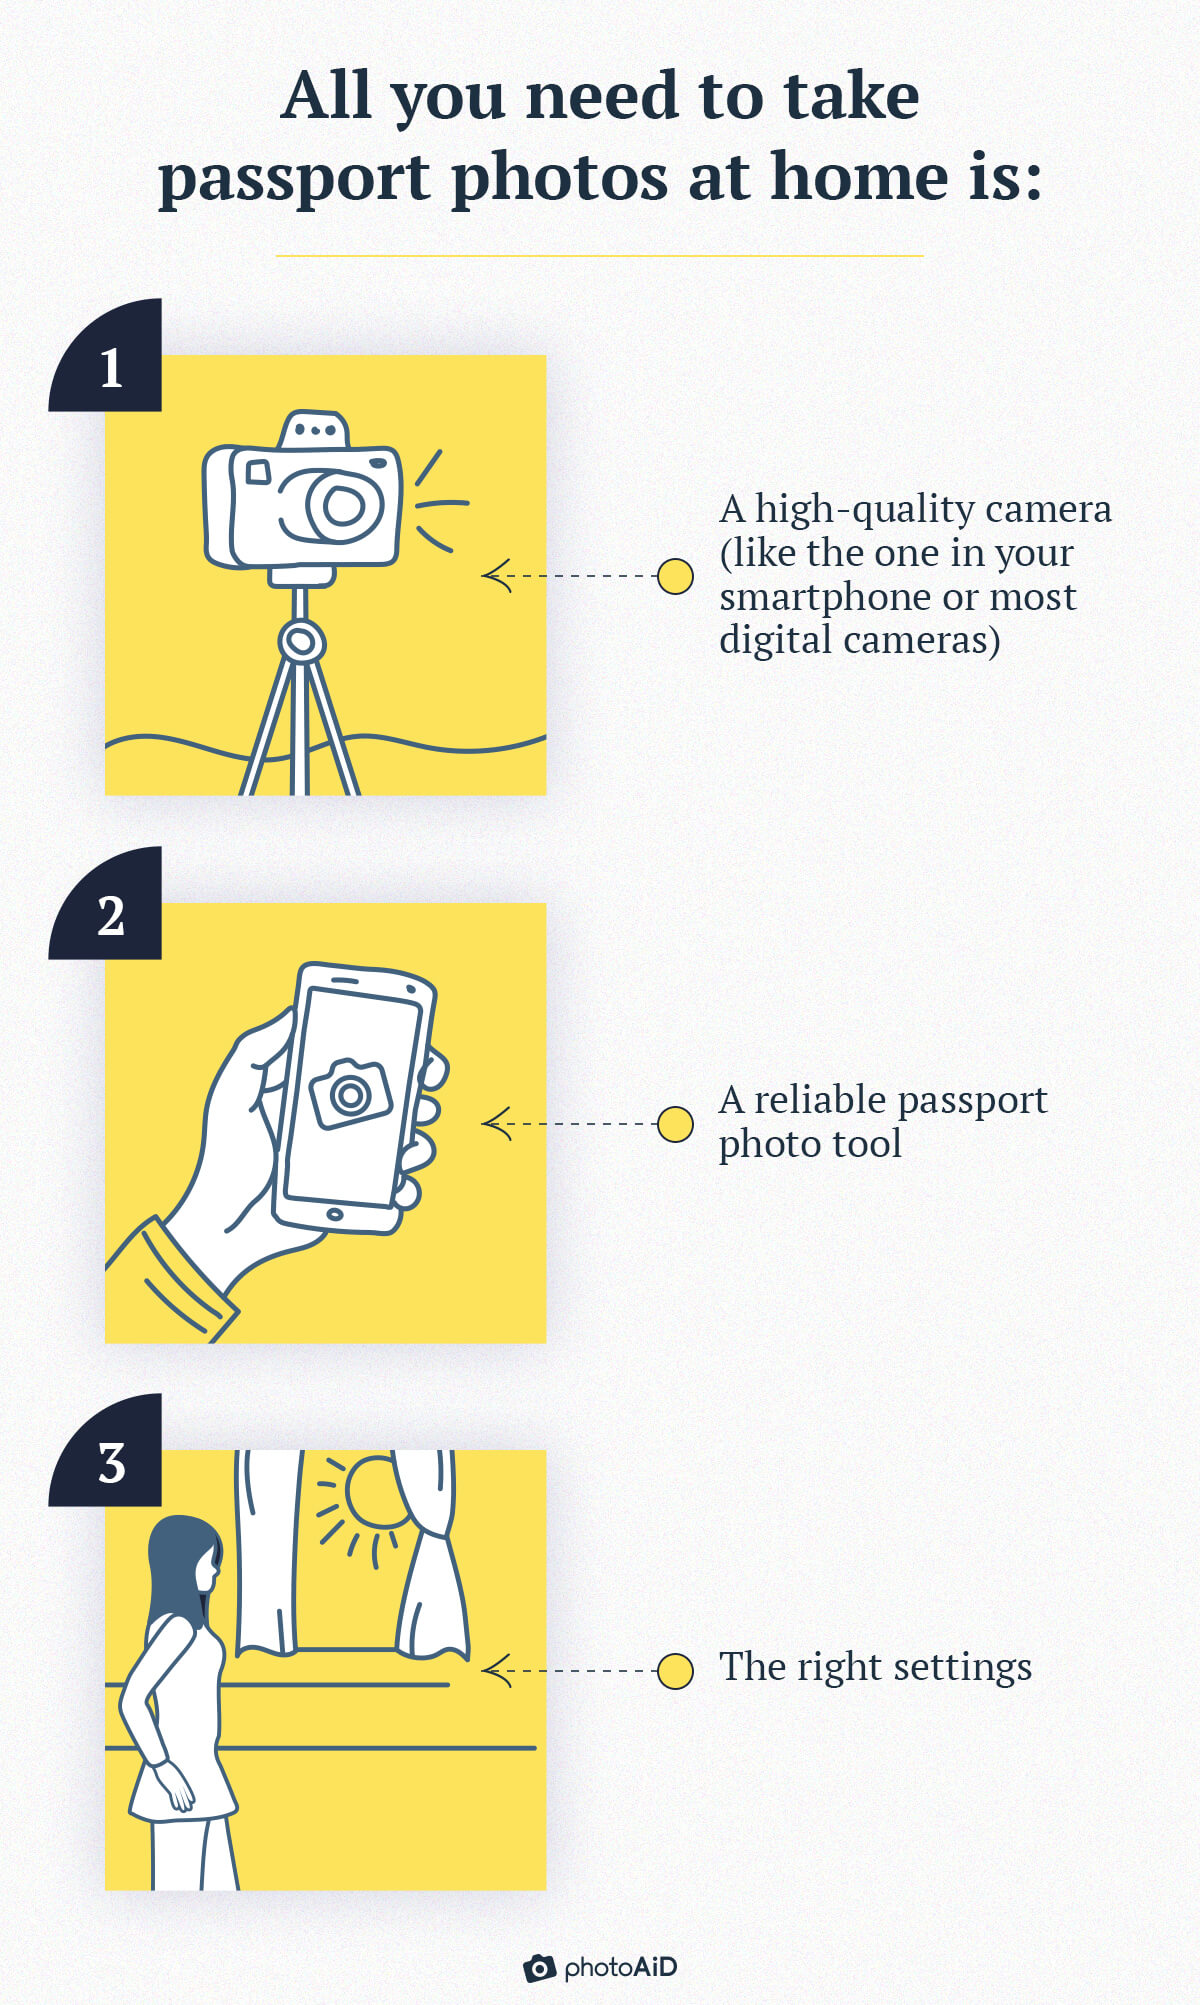 3 things you need to take passport photos at home